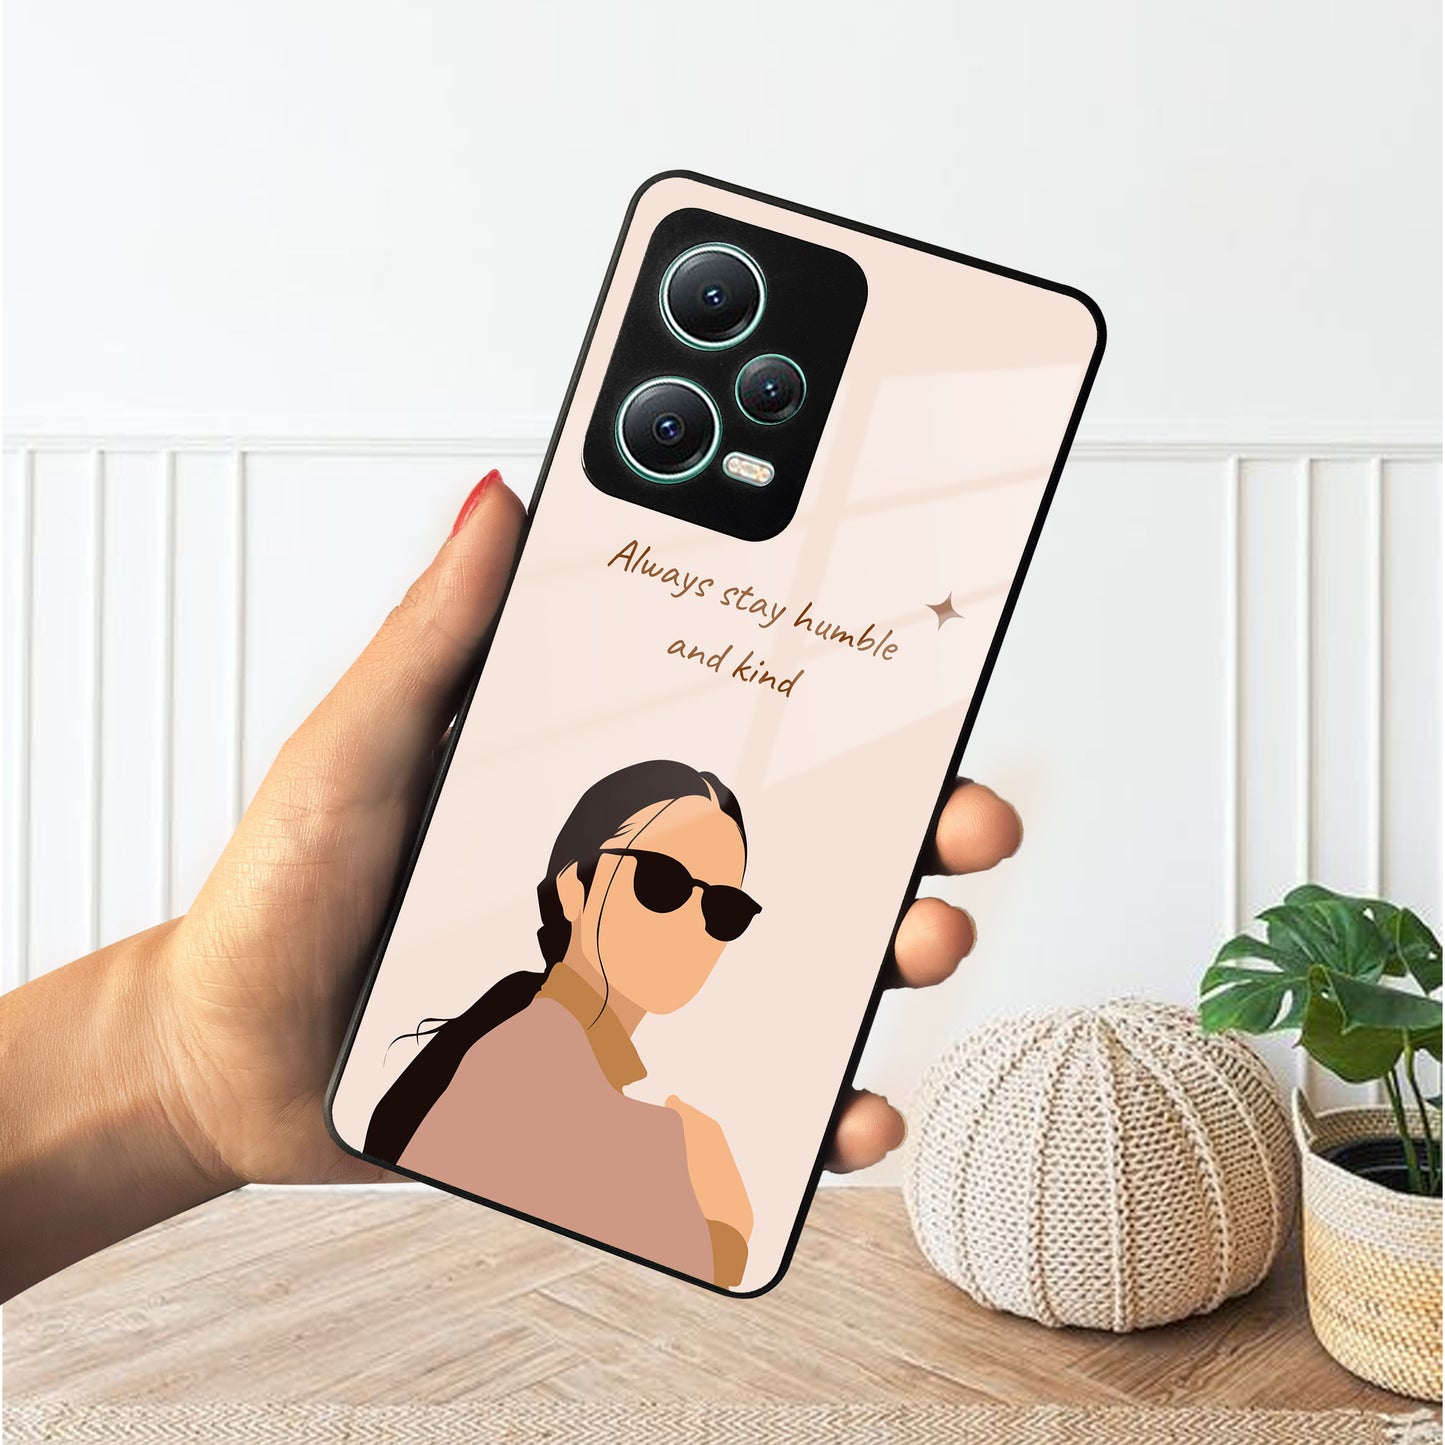 Always Stay Humble And Kind Glass Phone Cover for Redmi/Xiaomi